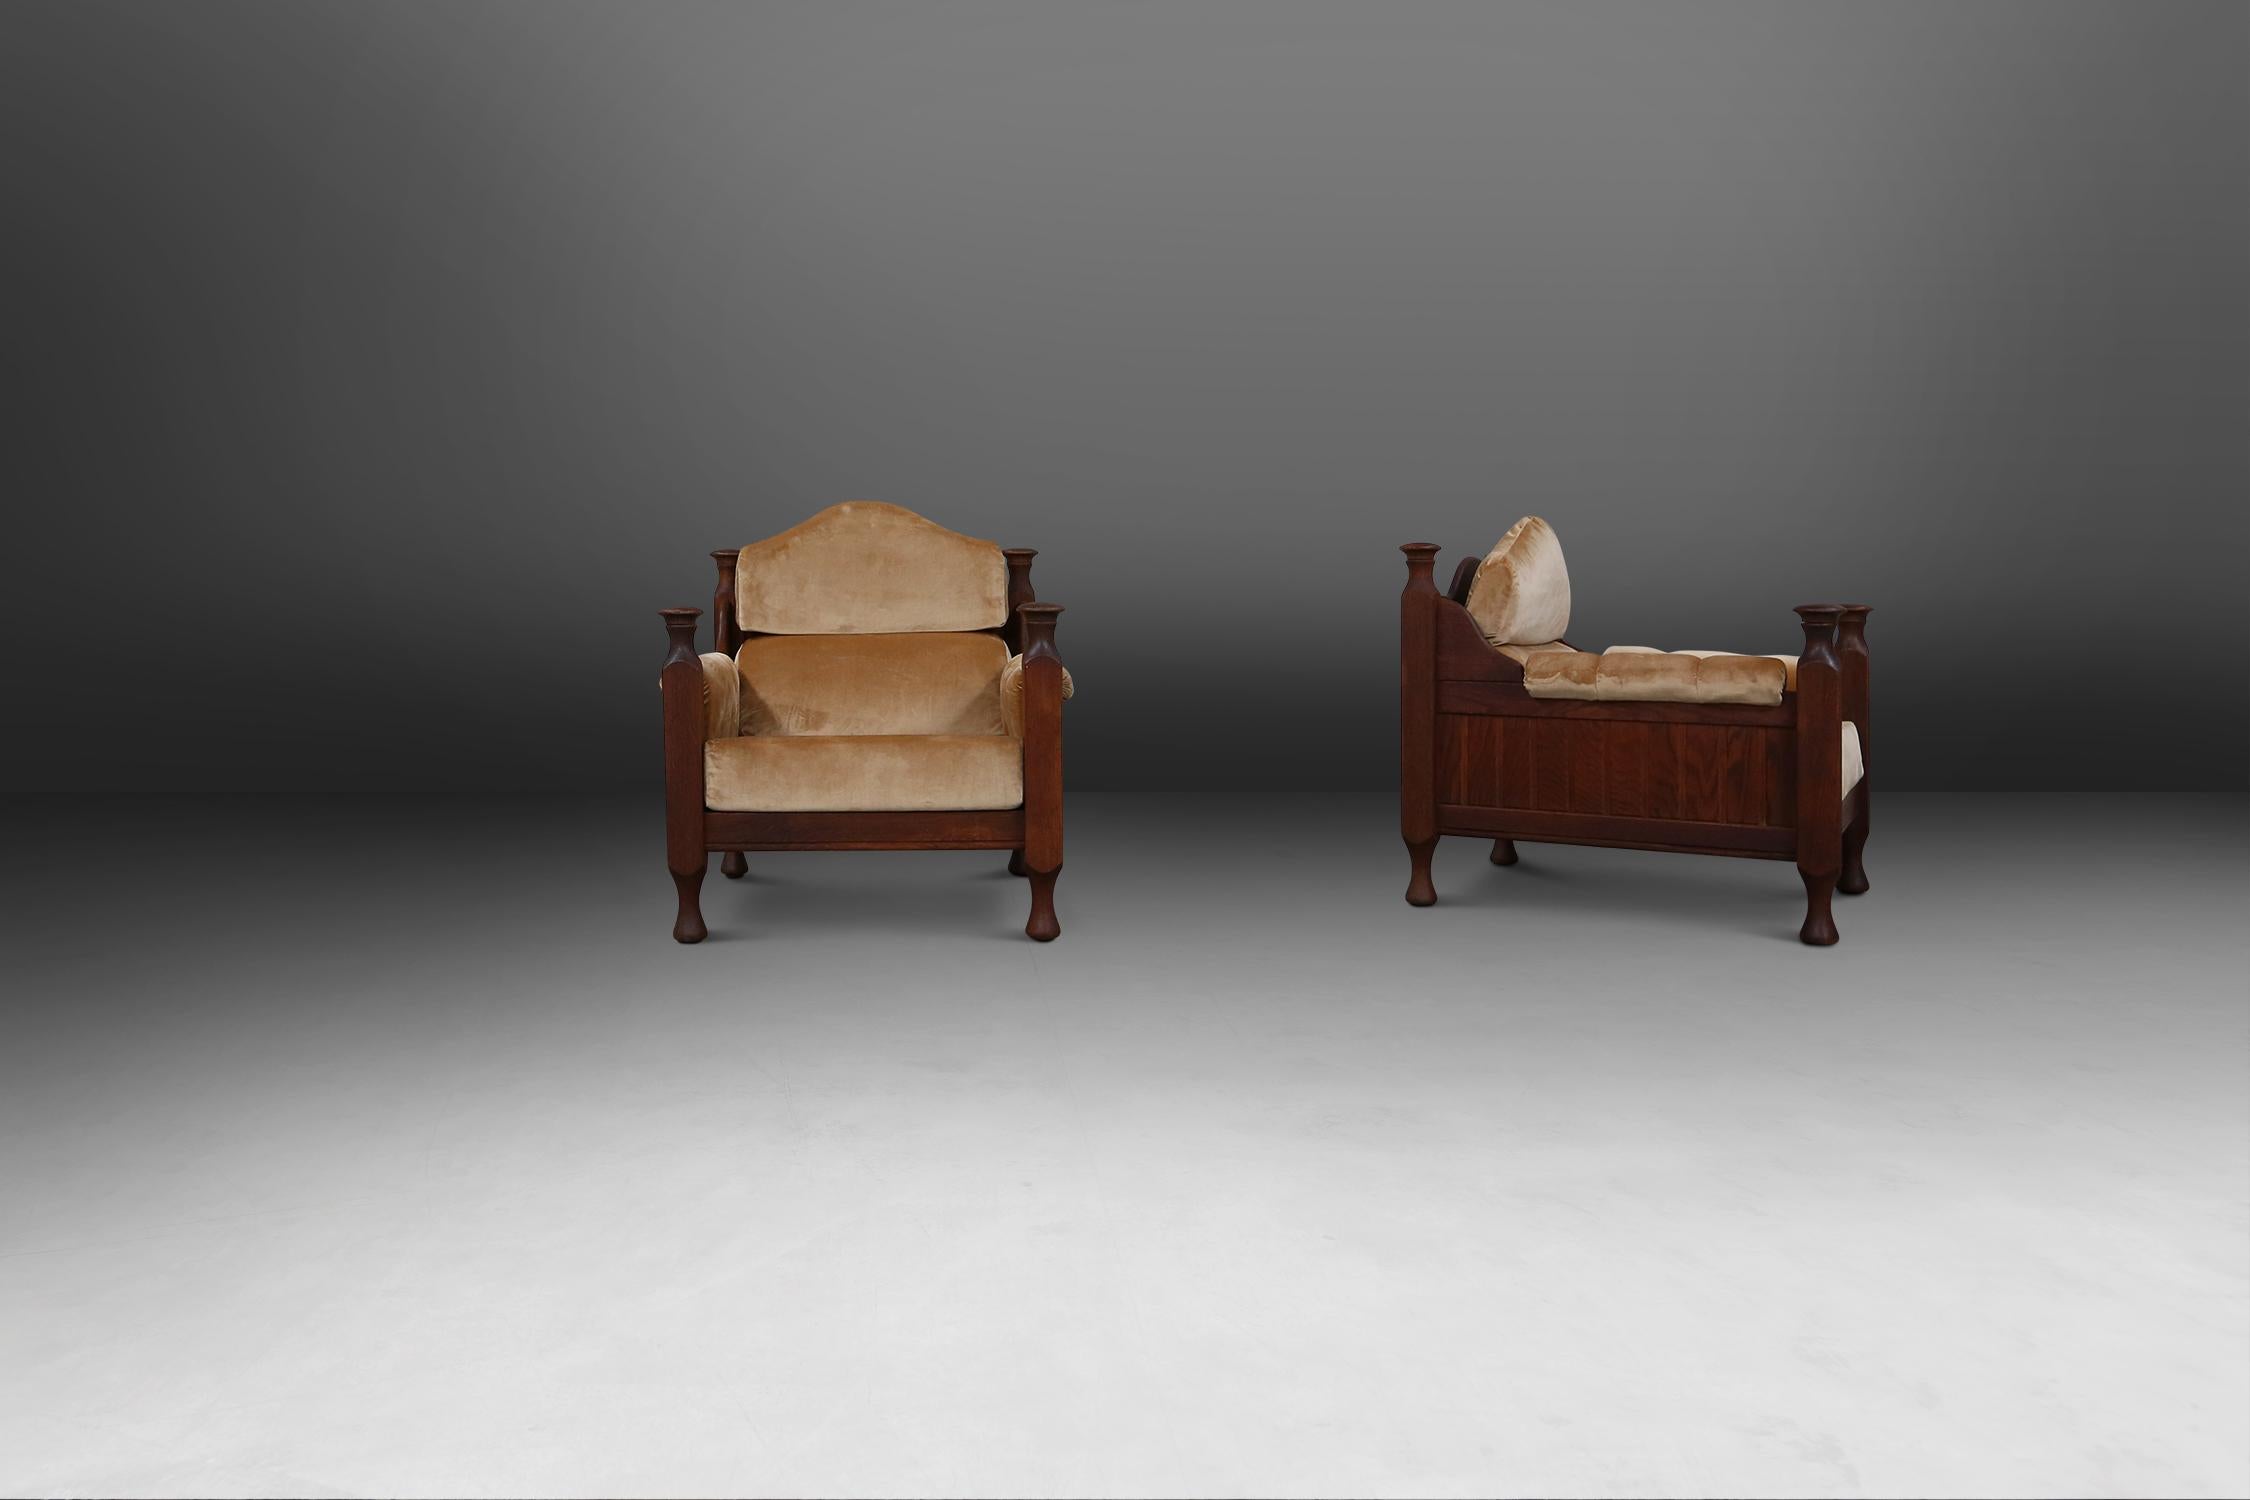 Pair of solid oak brutalist armchairs with beige velvet cushions.
These chairs have a robust look with some nice details in the legs and side of the chairs.